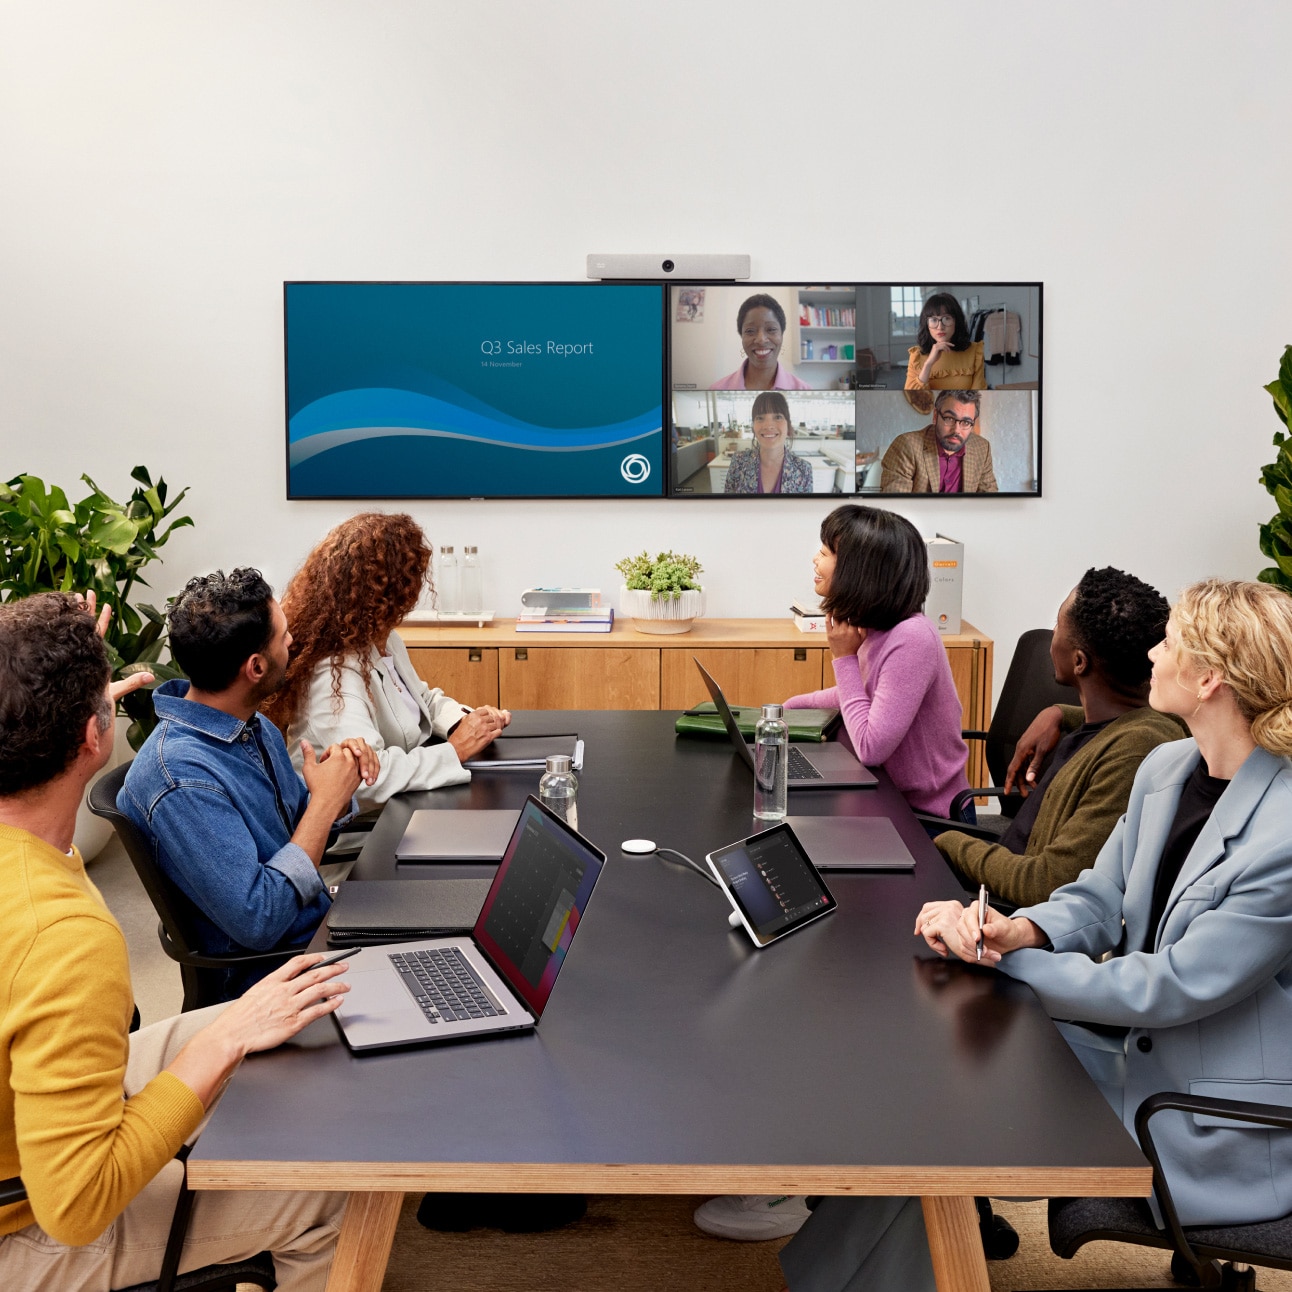 In-office workers video conference with hybrid colleagues using Cisco Room Kit device and Microsoft Teams.